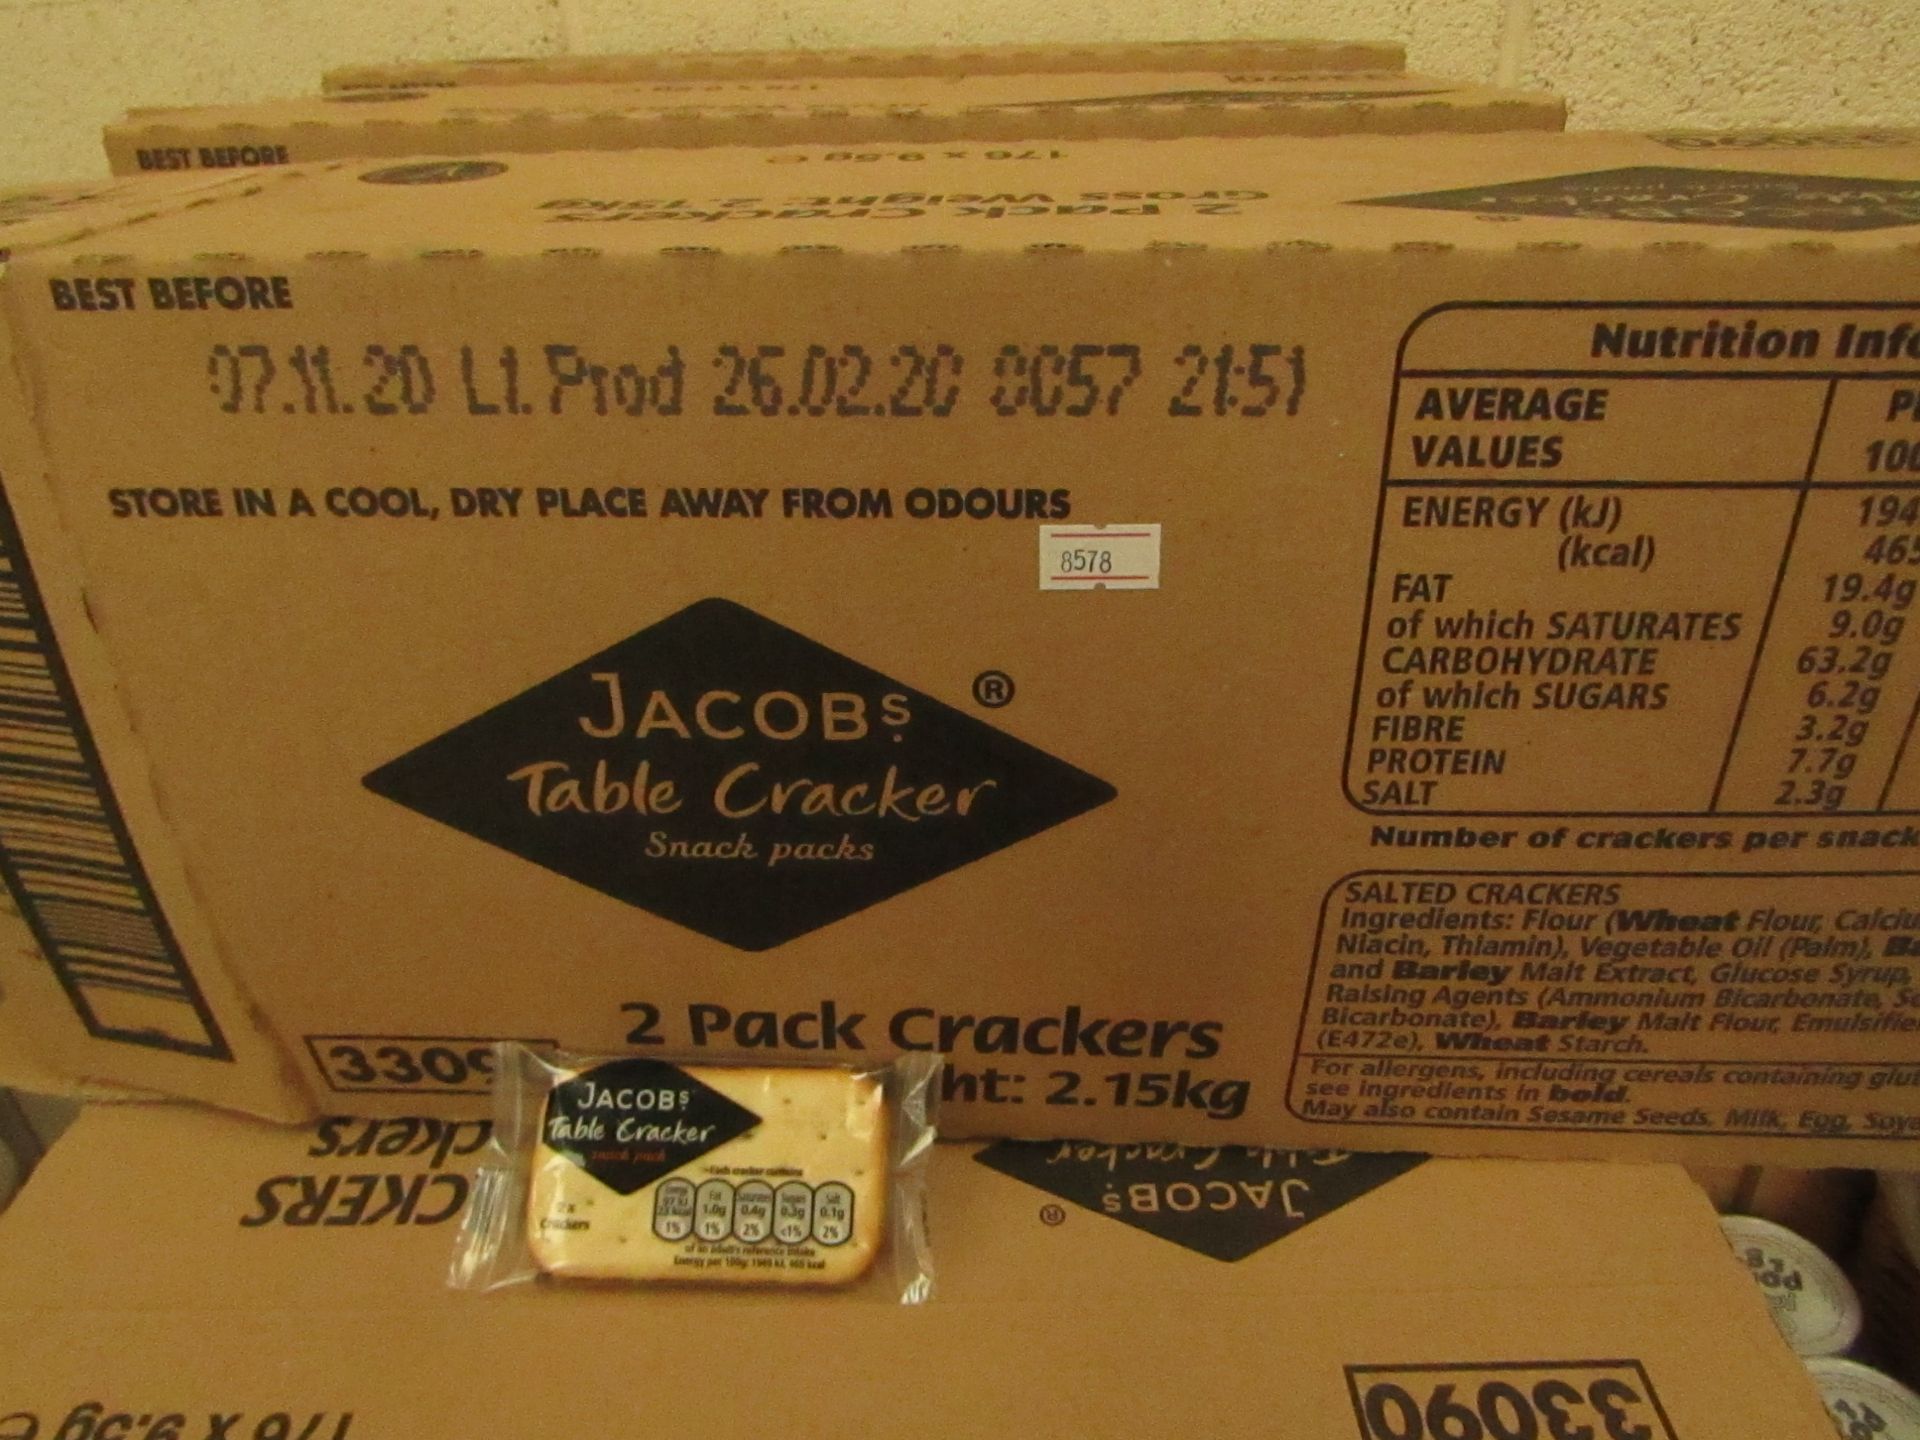 Jacob's - Table Crackers Snack Packs (176 x 9.5g) - BBD 07/11/20 - Unused & Boxed.